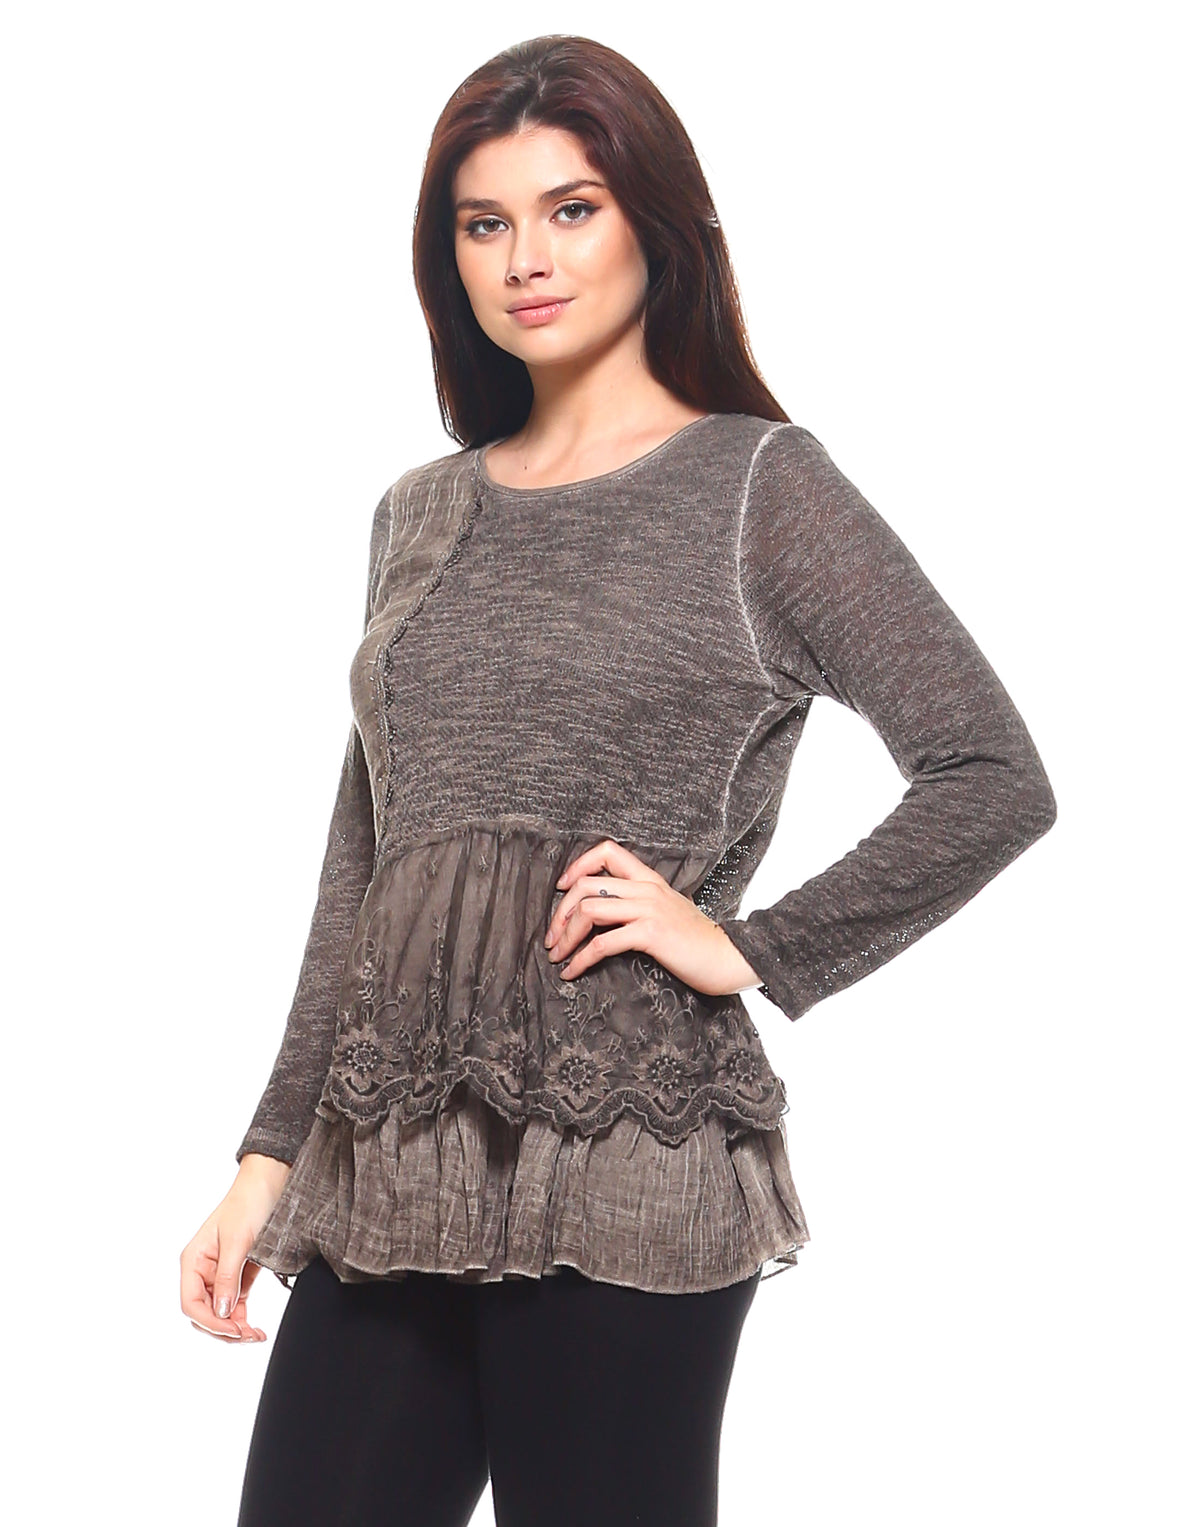 Brown Lace & Ruffles Full Sleeve Top